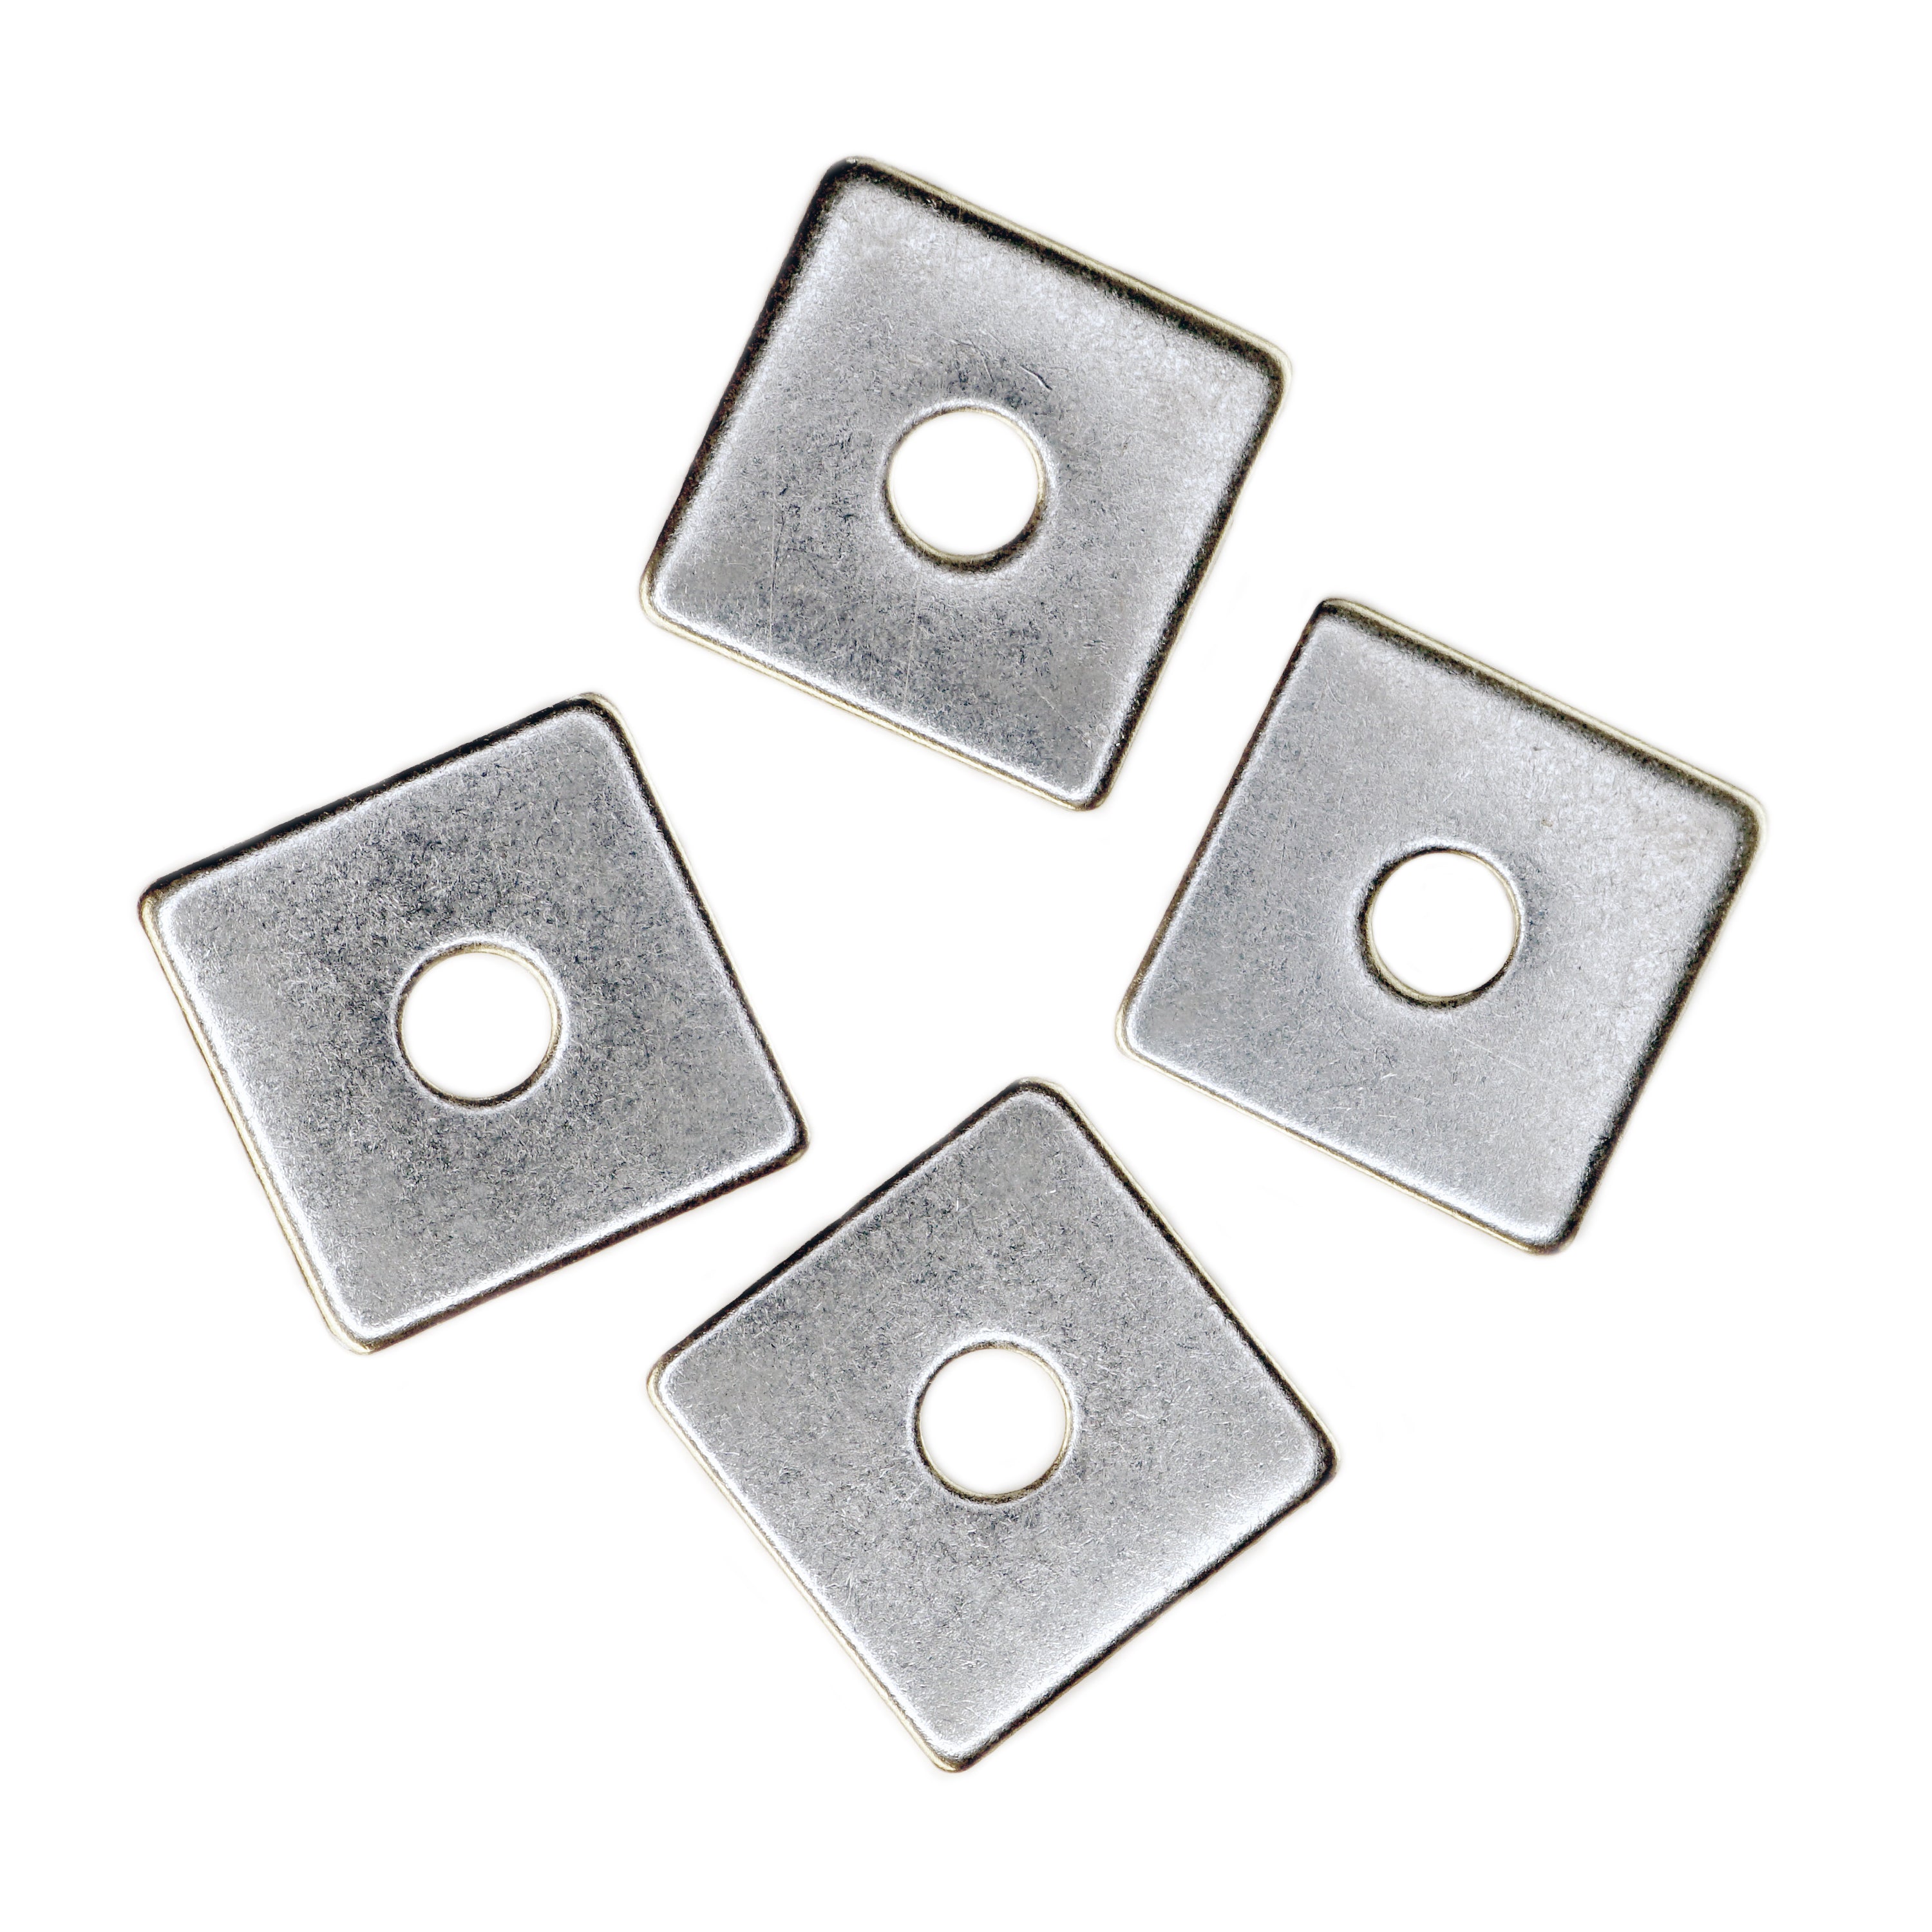 M4 stainless steel square shims (4PCS)